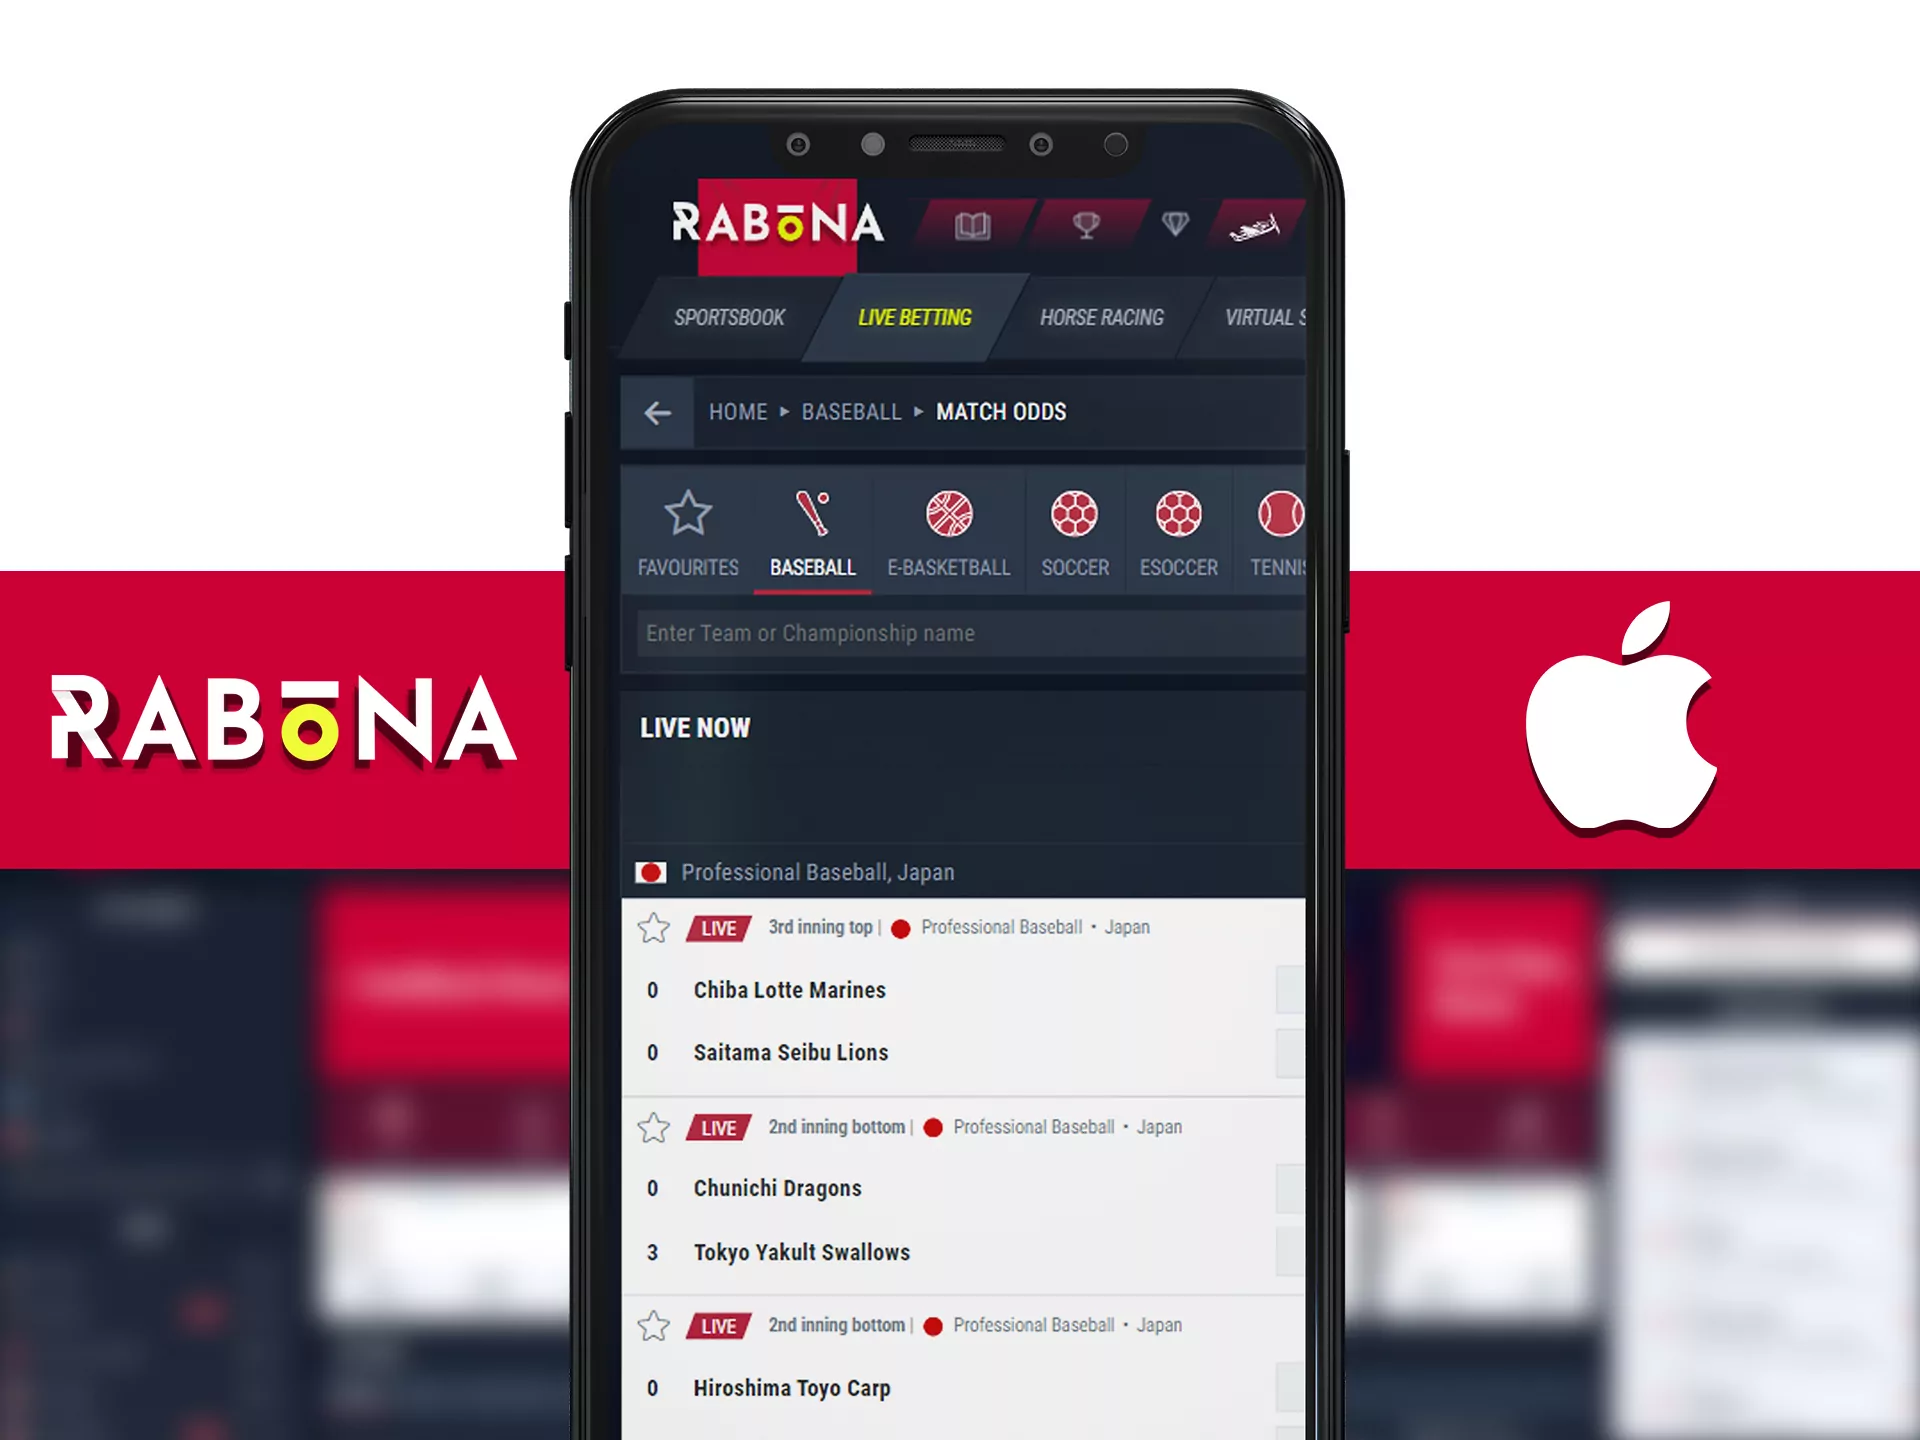 Download Rabona app on your ios device.